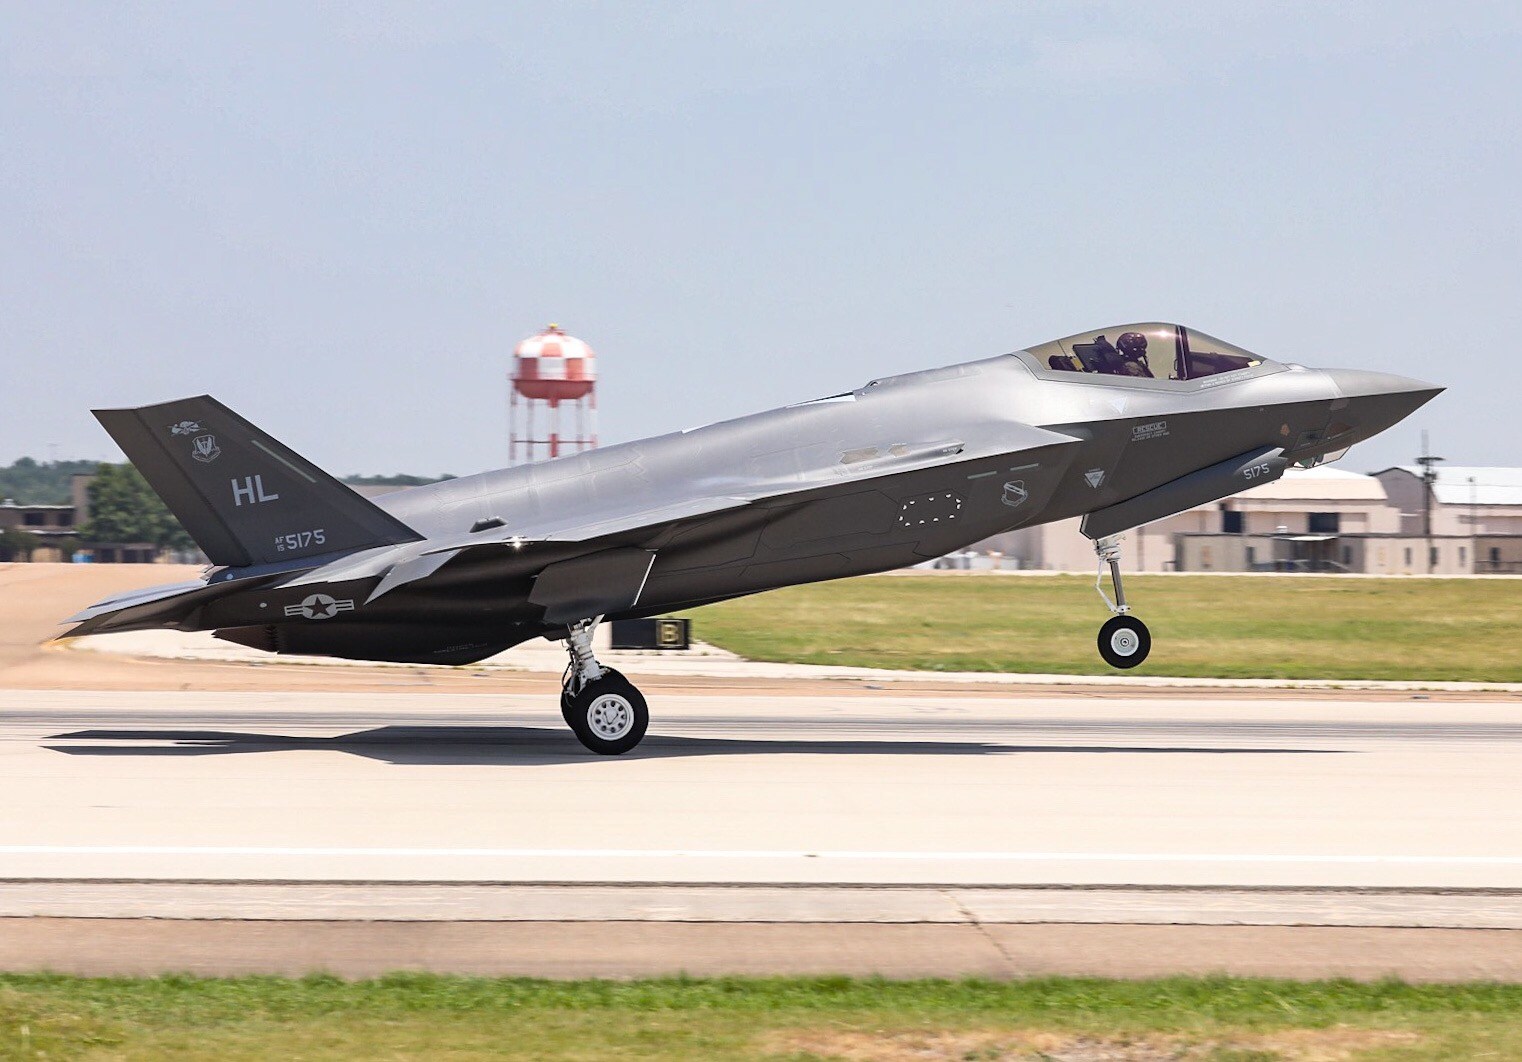 Germany Becomes Latest Country to Join the F-35 Lightning II Global Team